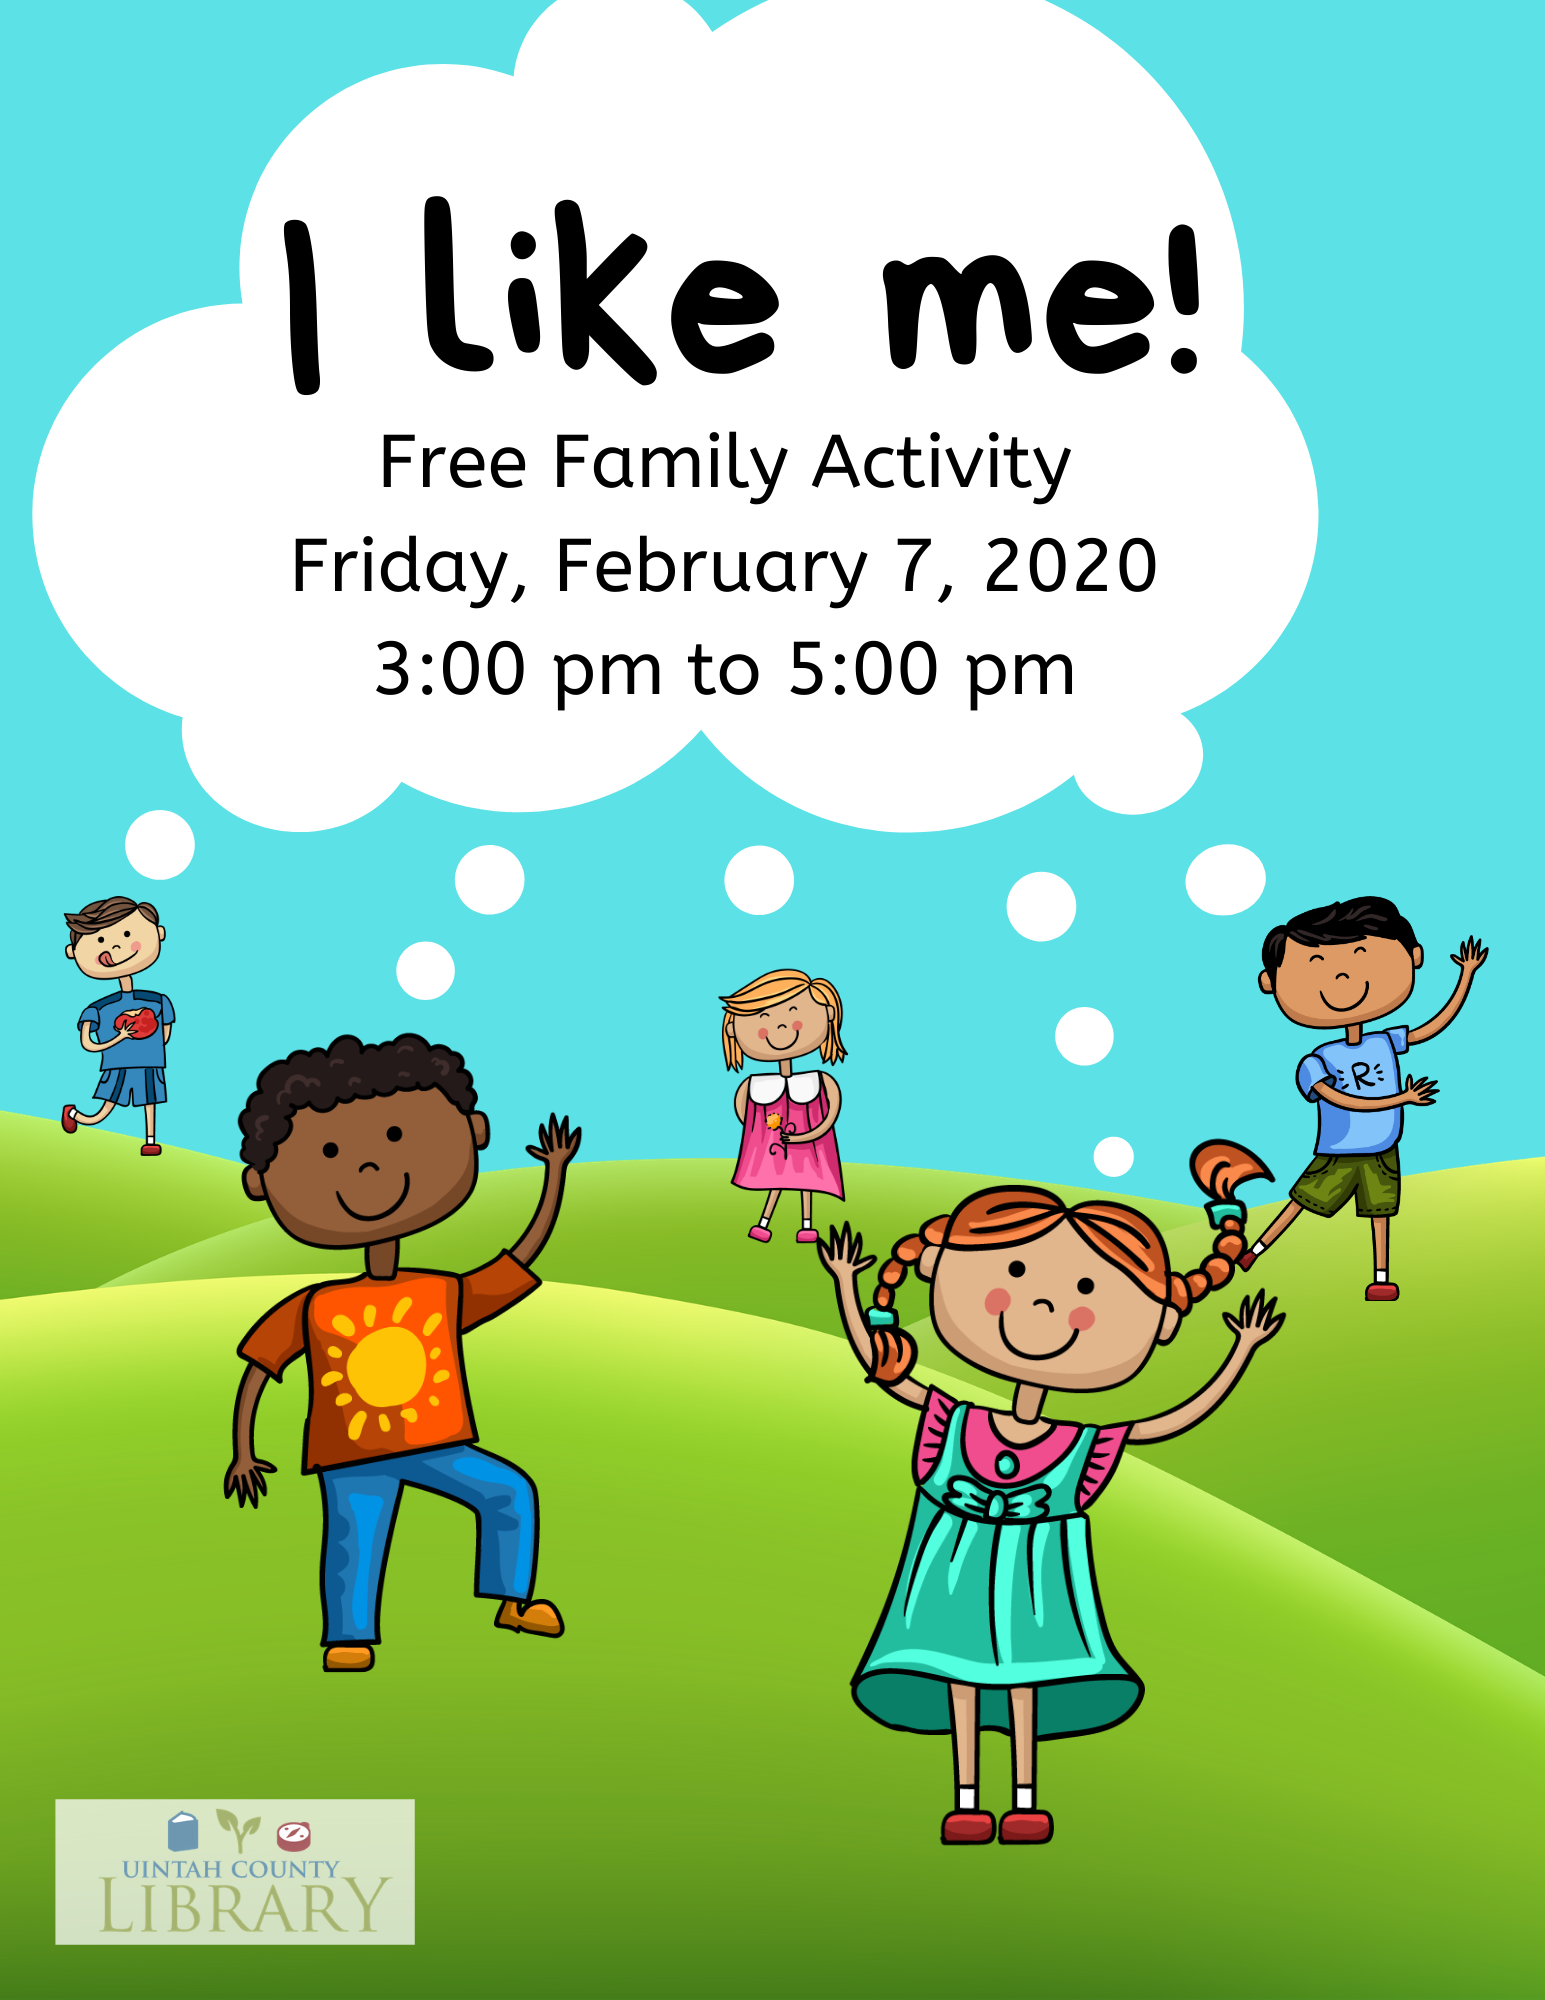 I like me! Friday, February 7, 2020, 3:00 pm to 5:00 pm; cartoon of children playing on green hills with a shared thought bubble announcing activity